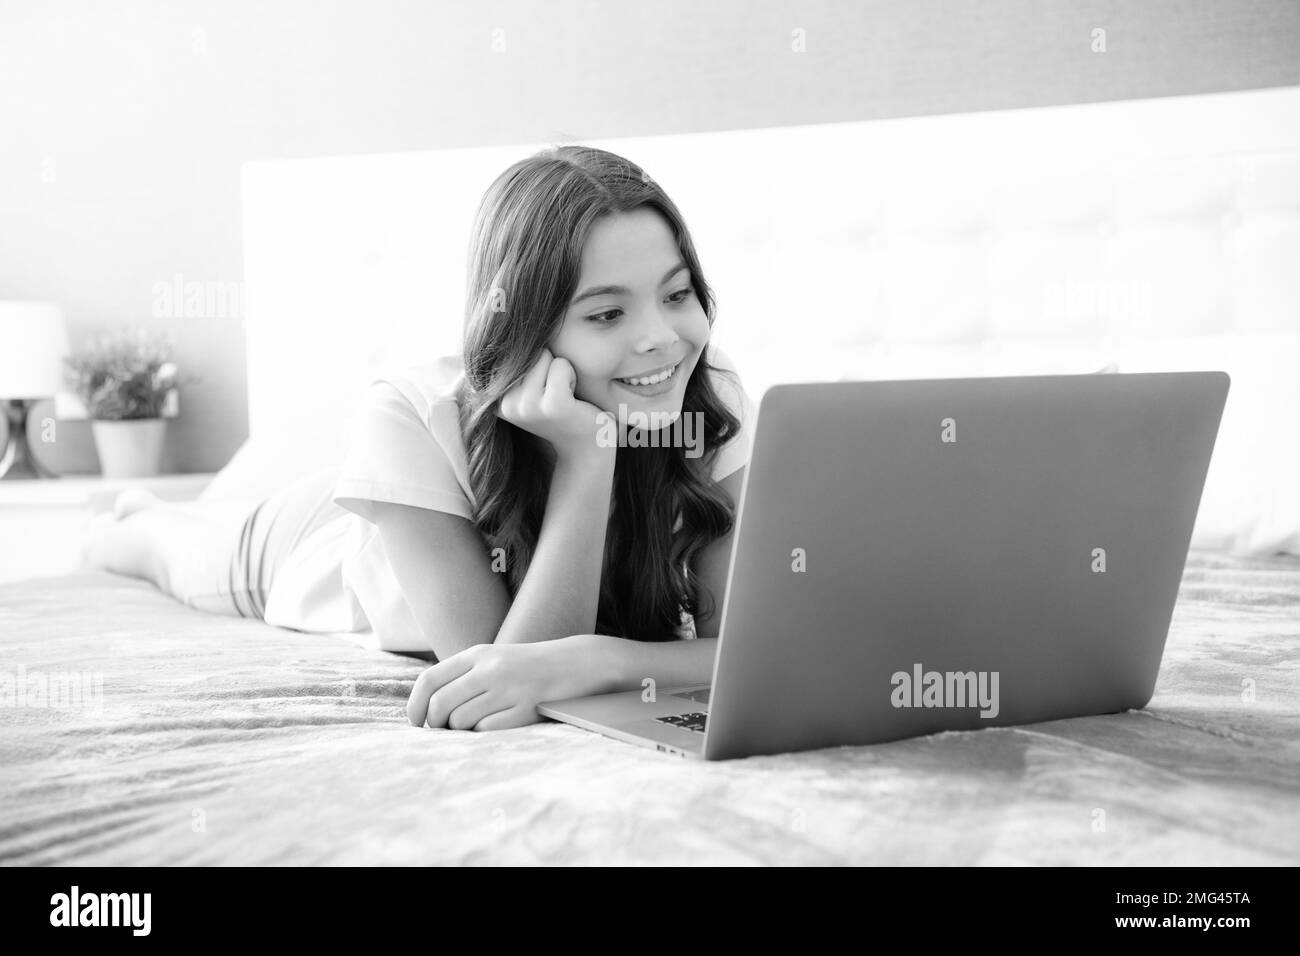 Teen school girl studying at home on bed with laptop. Stock Photo